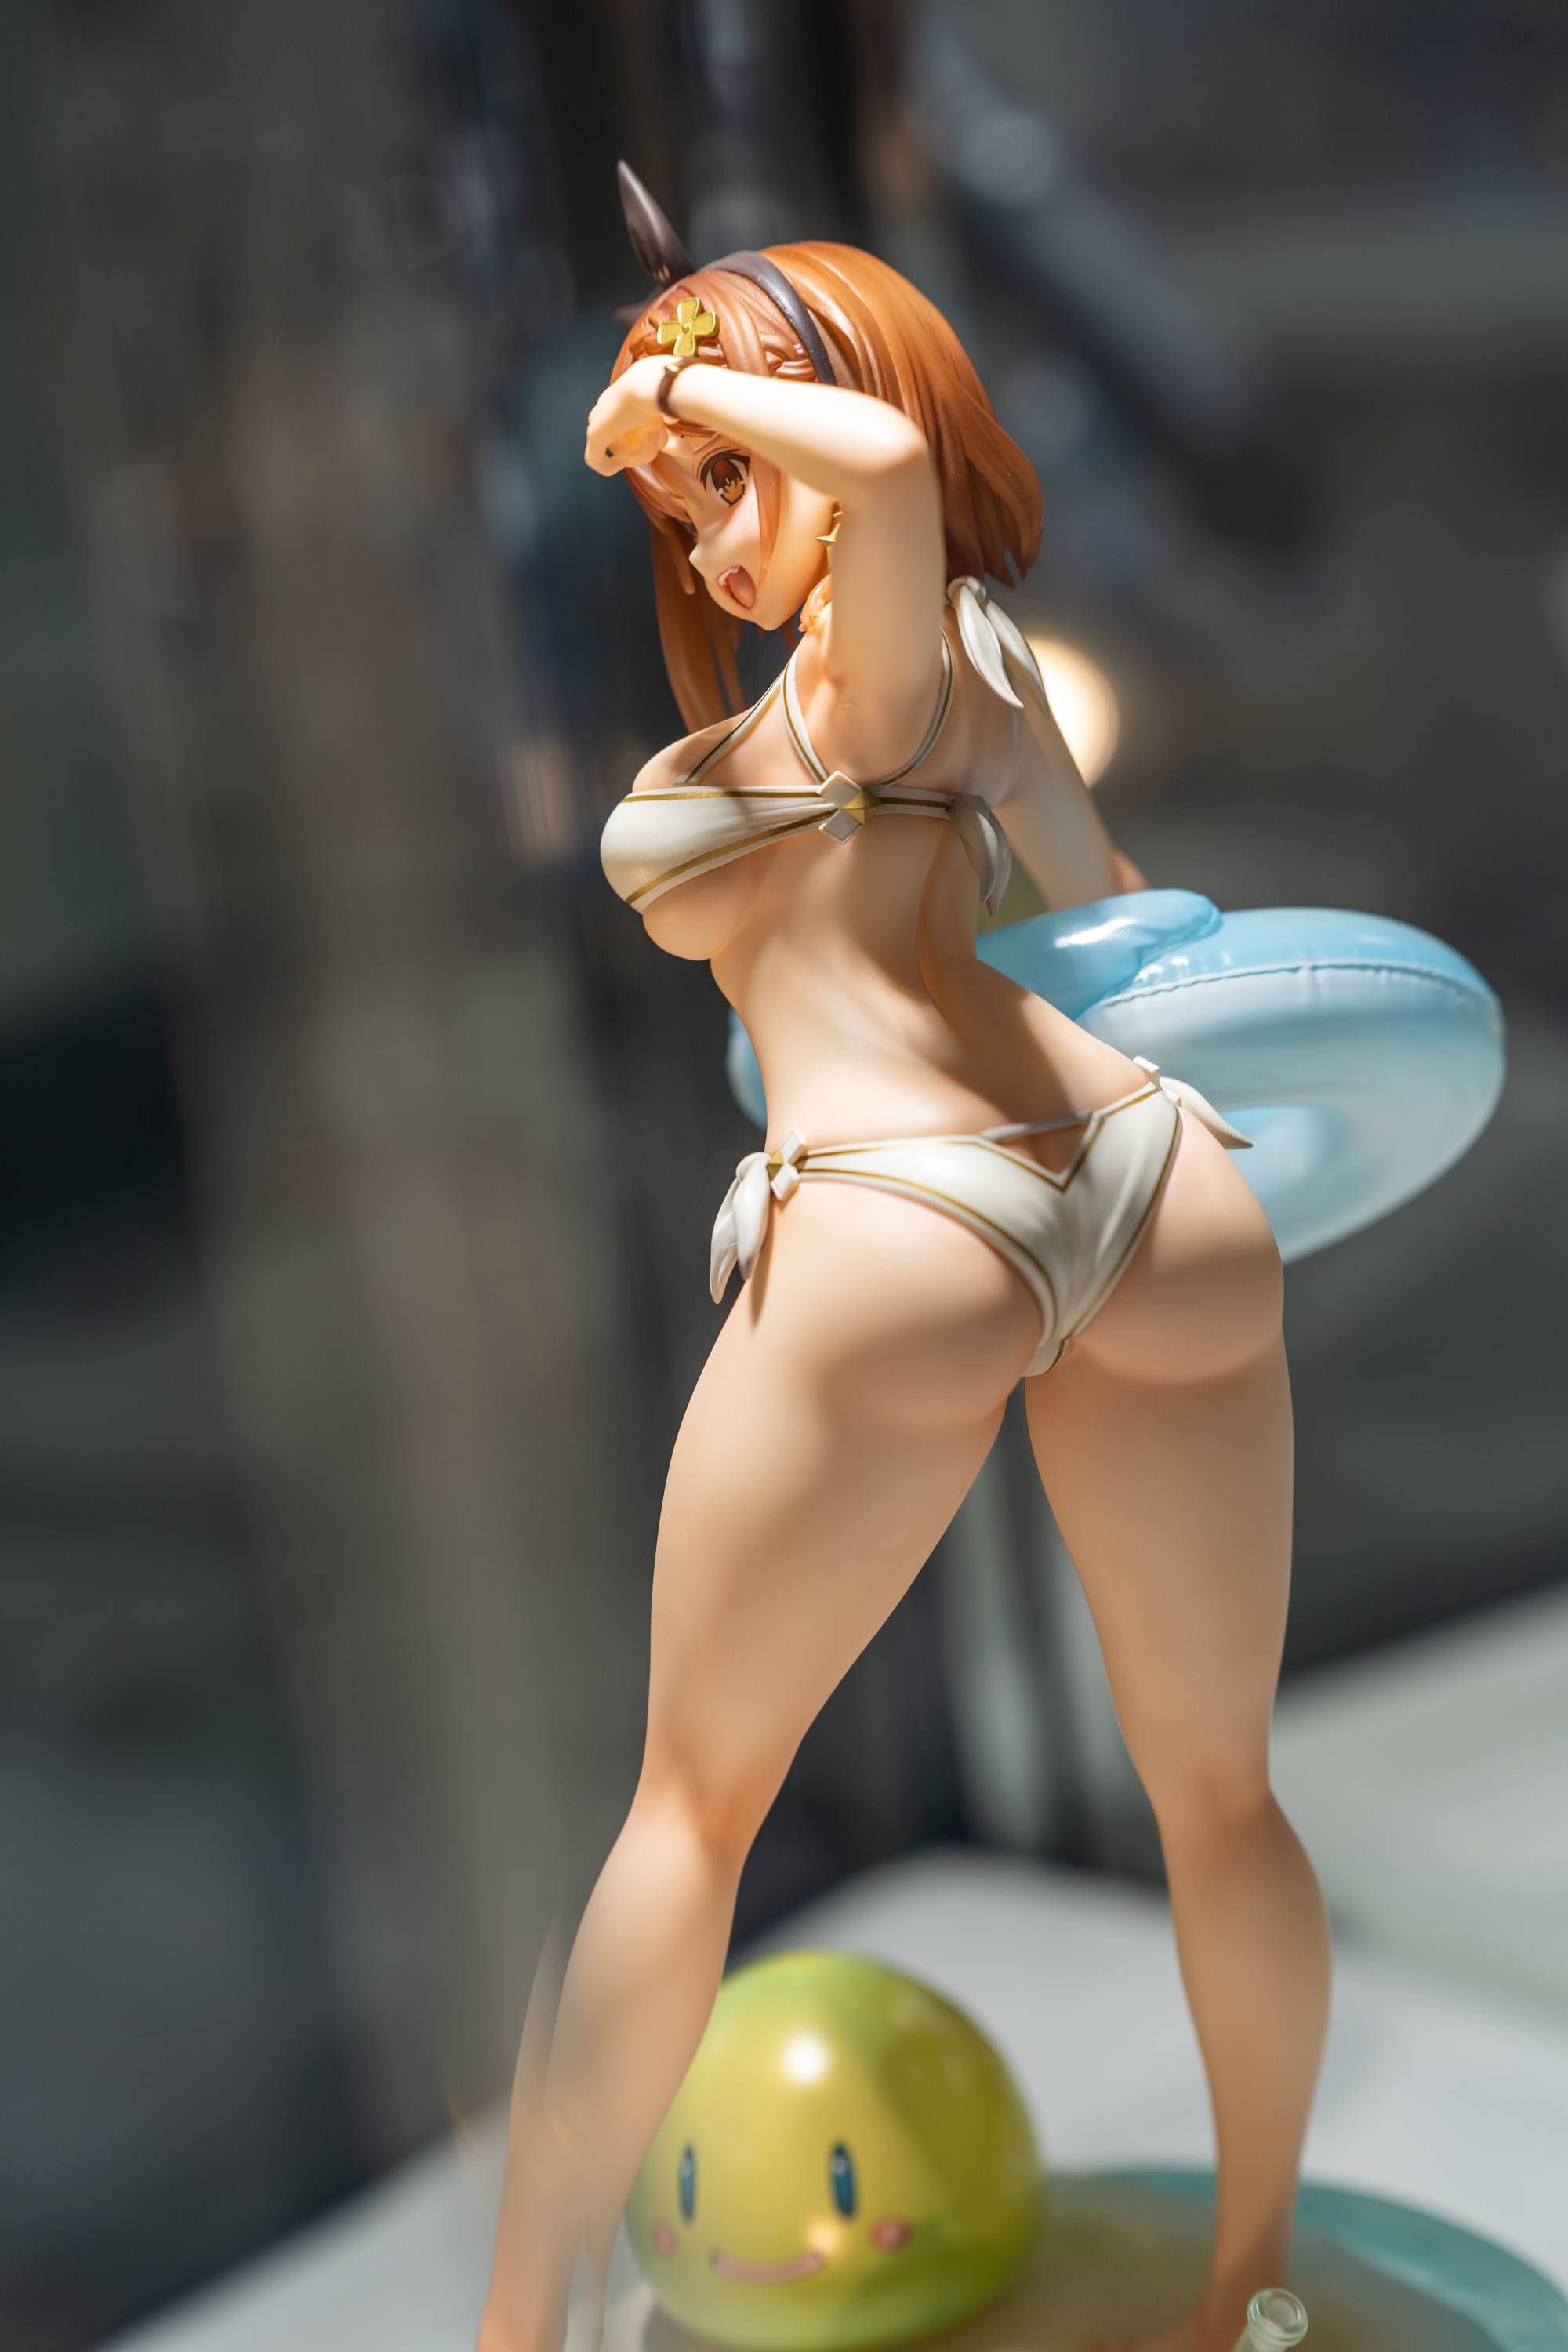 【Image】New figure wwwwwwww too etch called "Change of clothes riser" 5